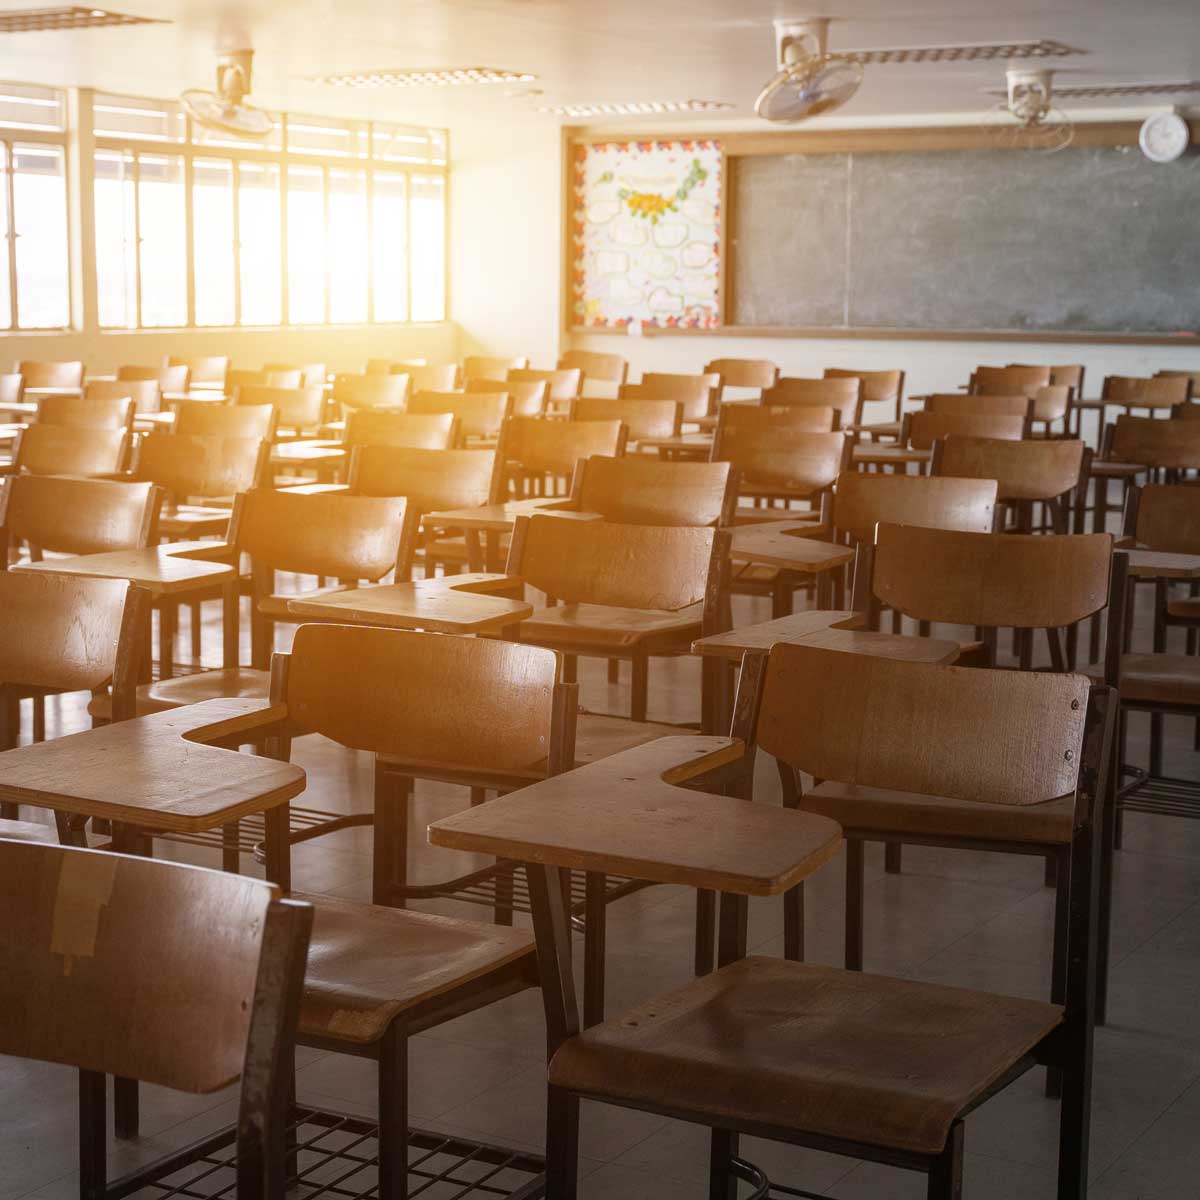 Empty classroom with vintage tone wooden chairs. school concept.